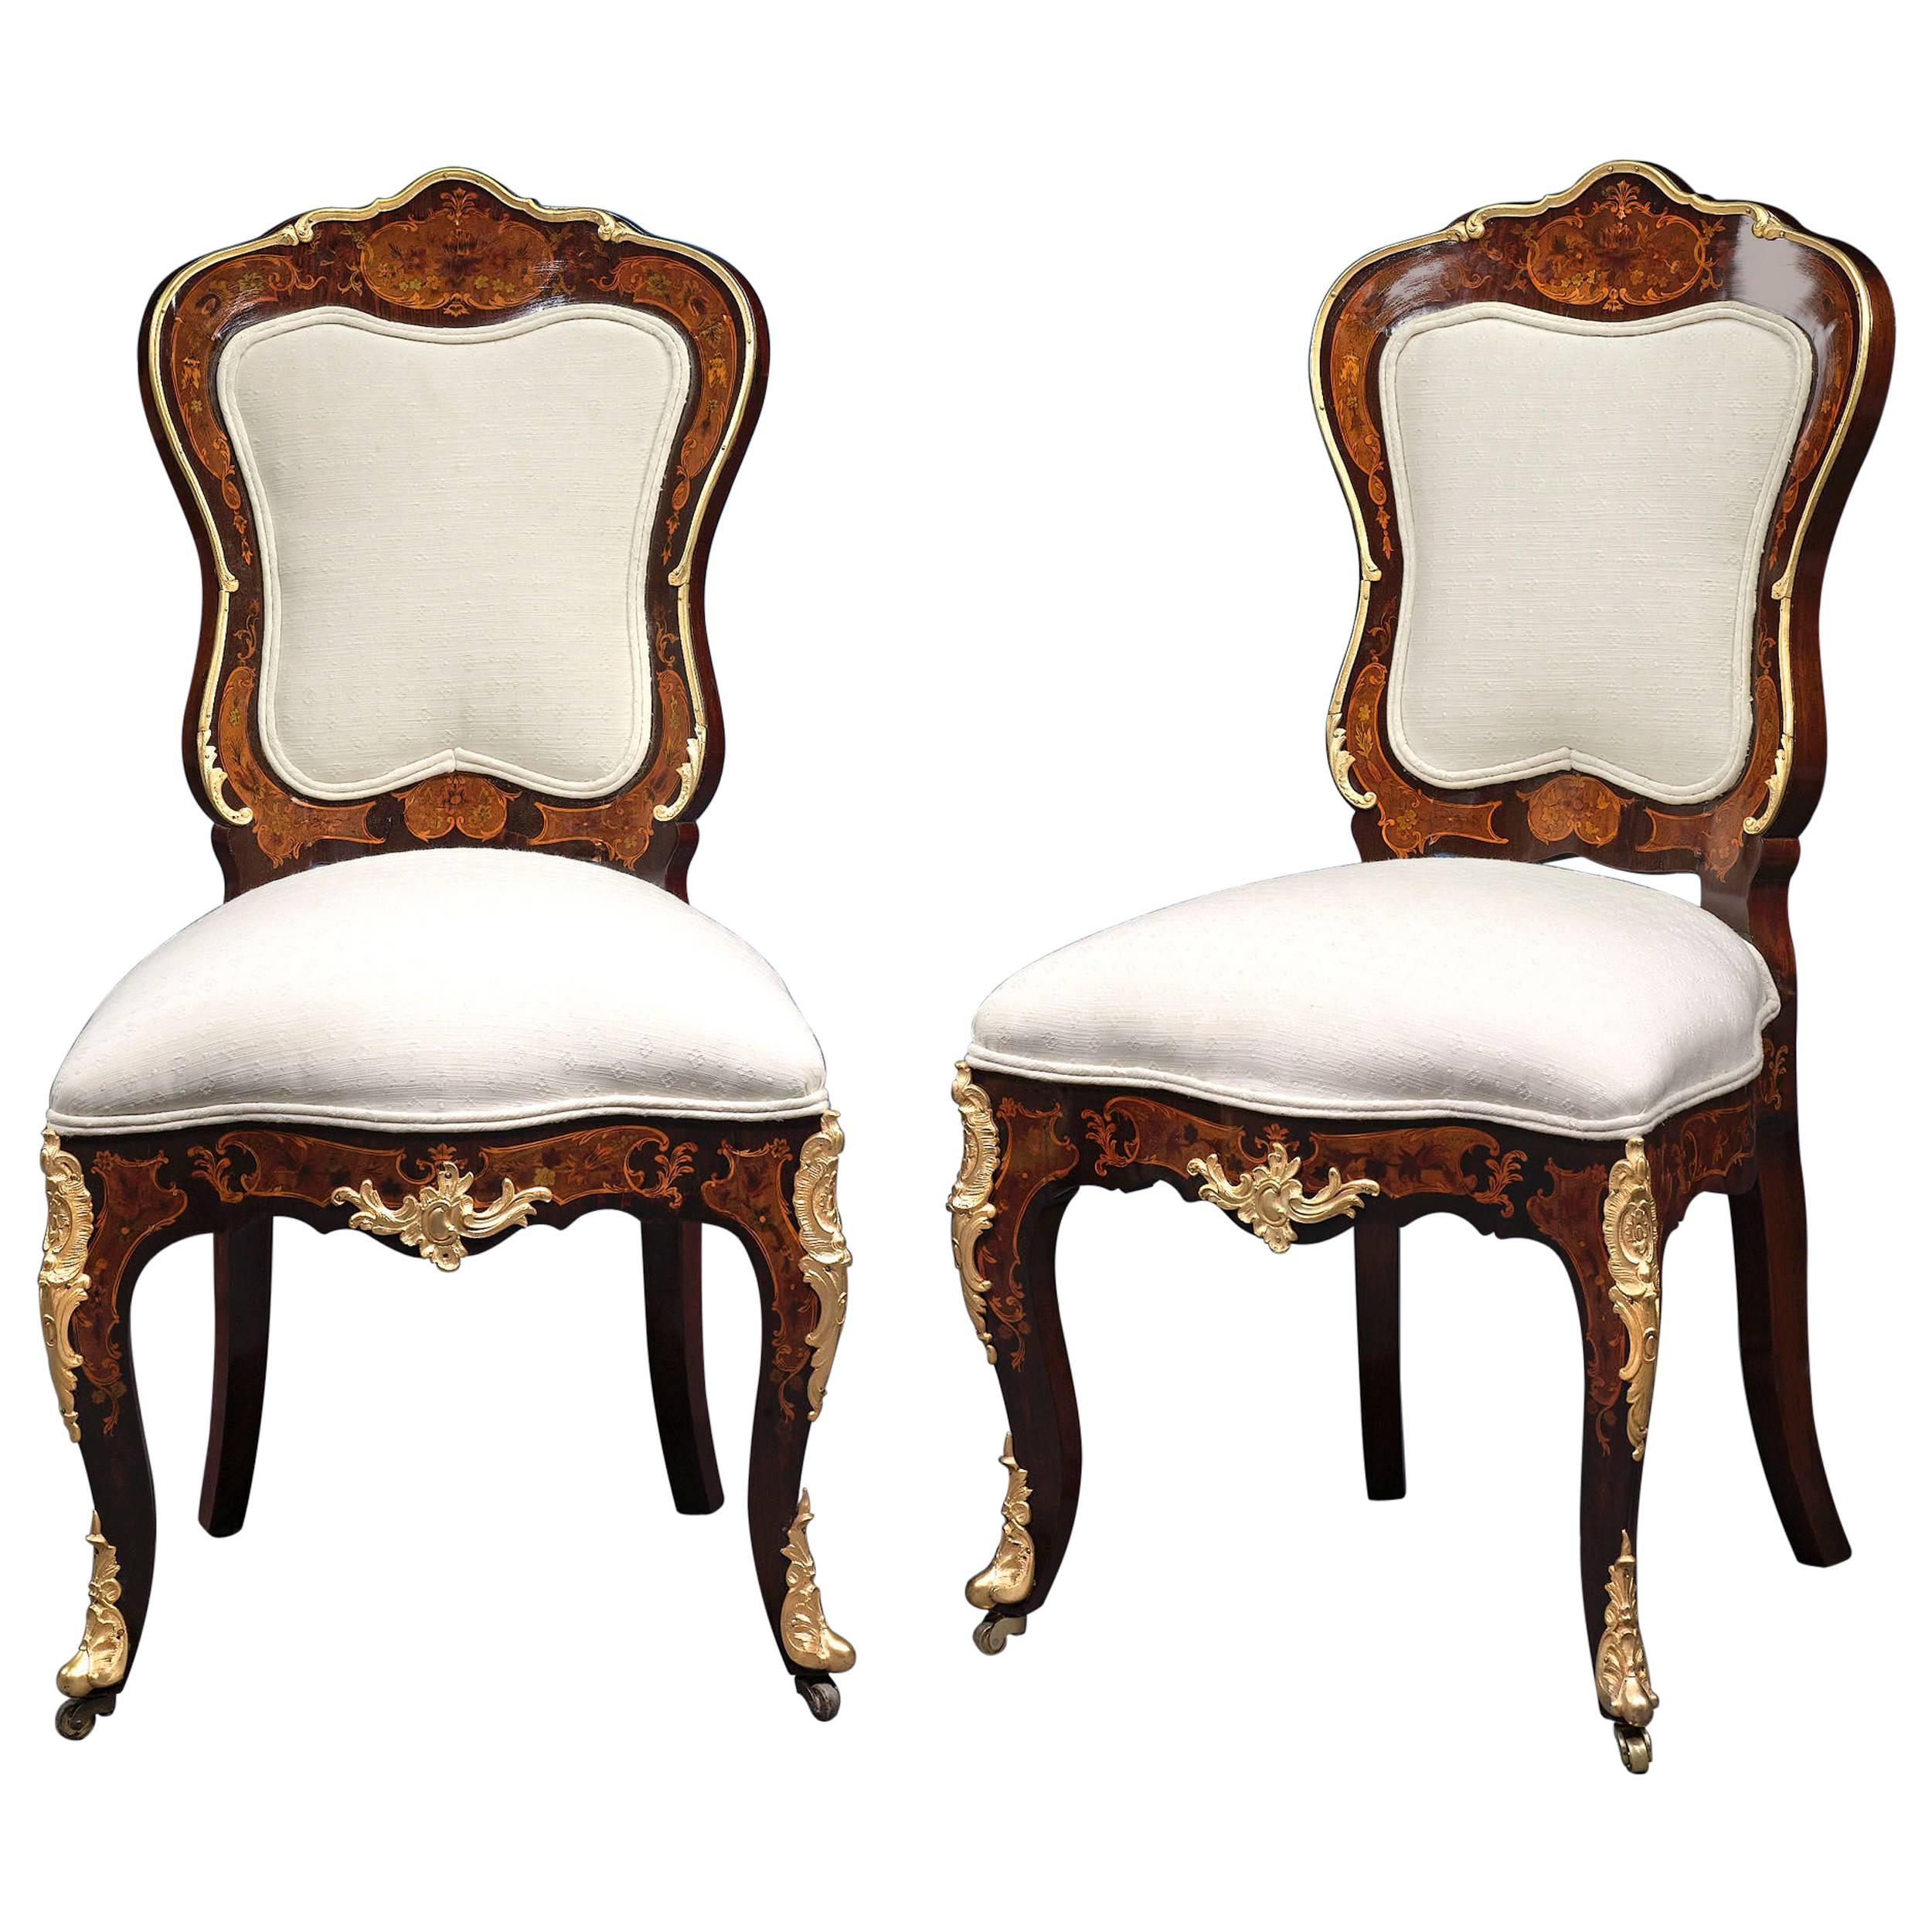 Sold at Auction: French Louis XV Rococo Style Fauteuil Chair